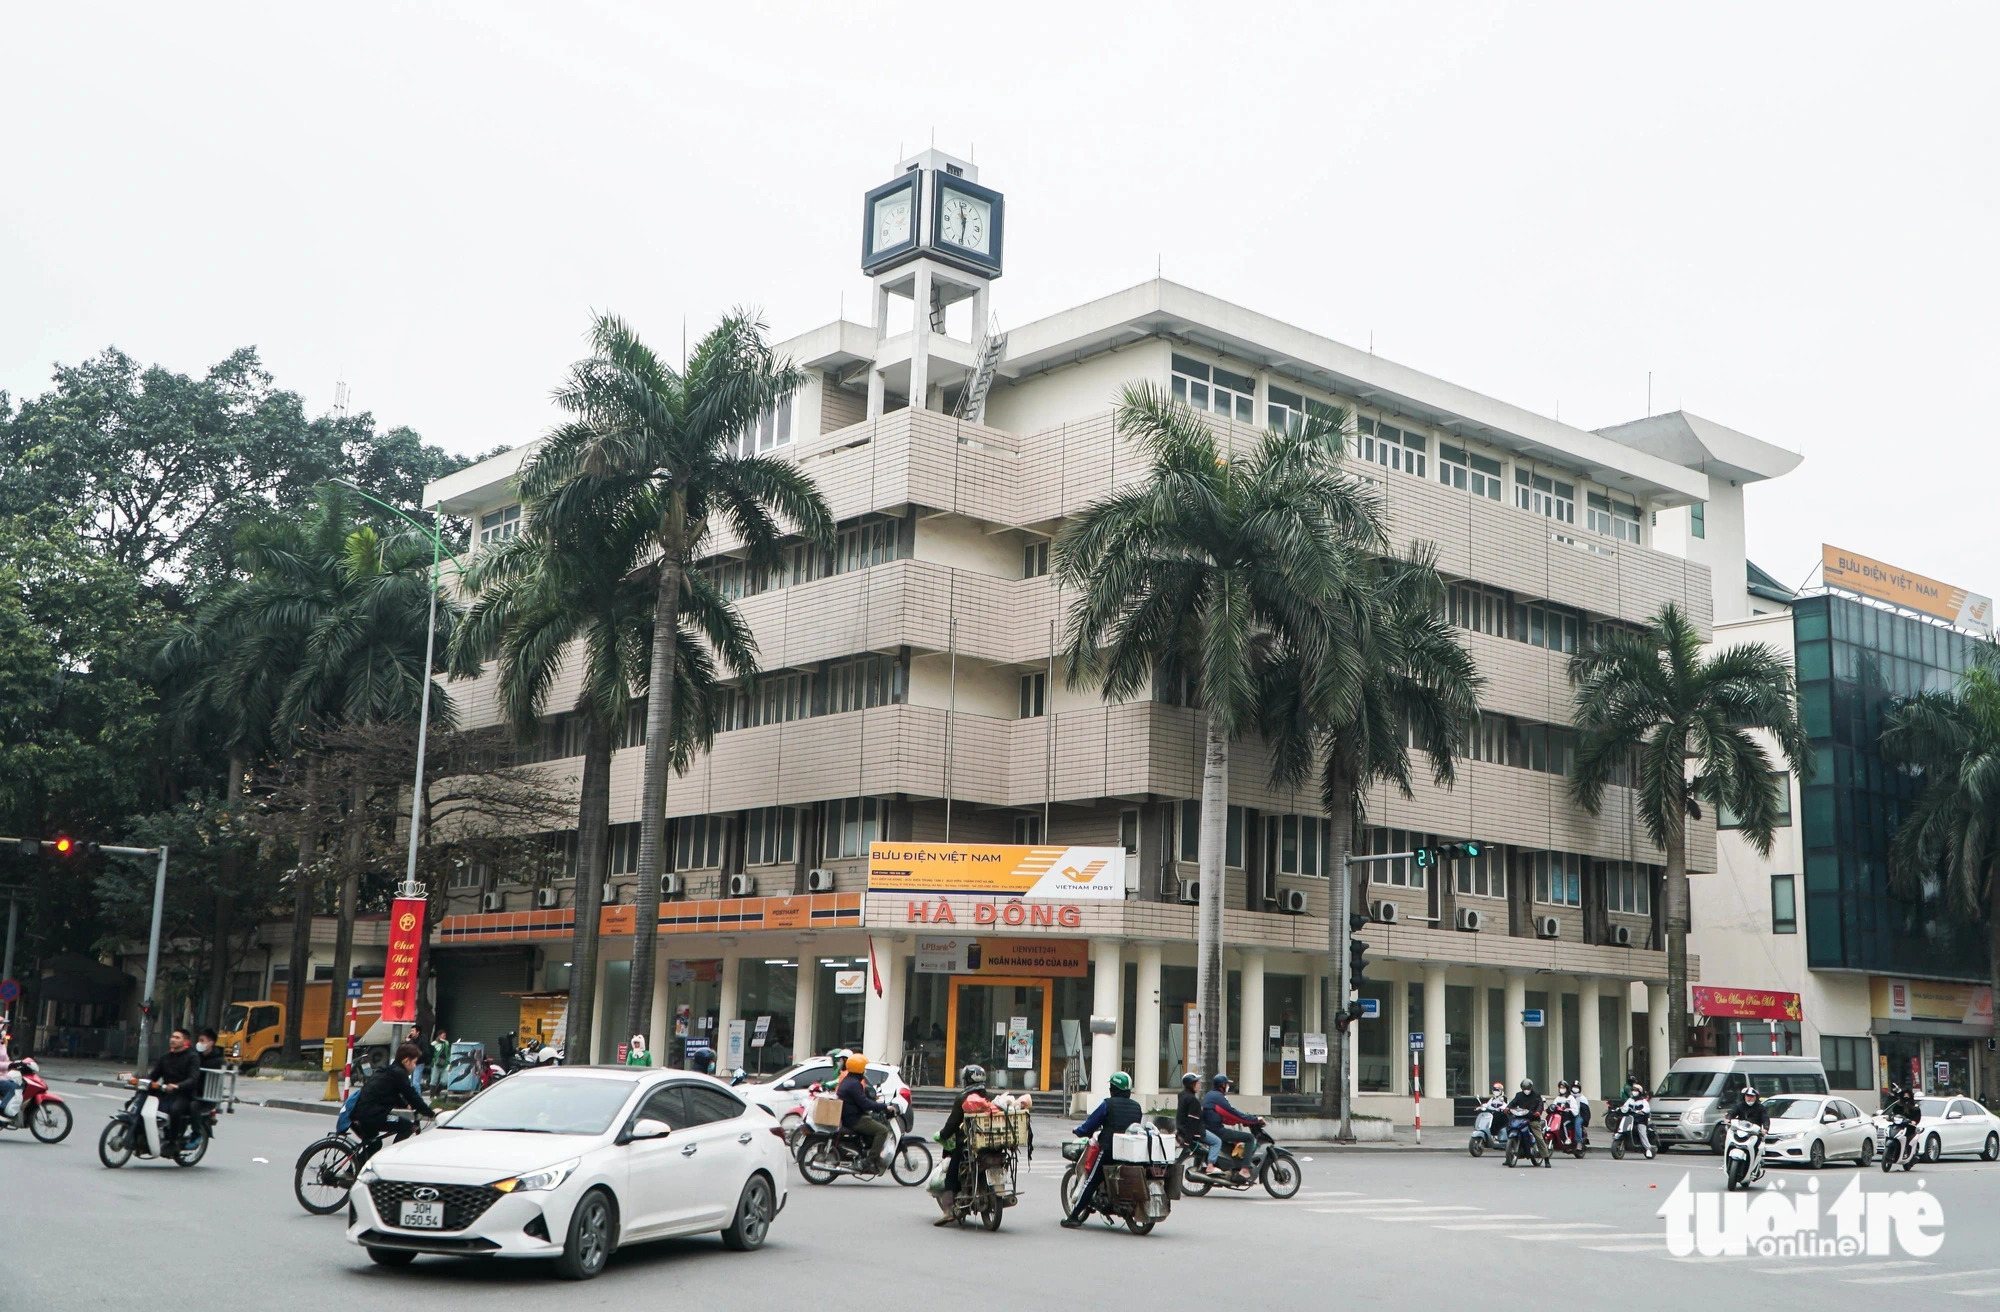 The Ha Dong post office building is located in the center of Ha Dong District, Hanoi. Photo: Pham Tuan / Tuoi Tre